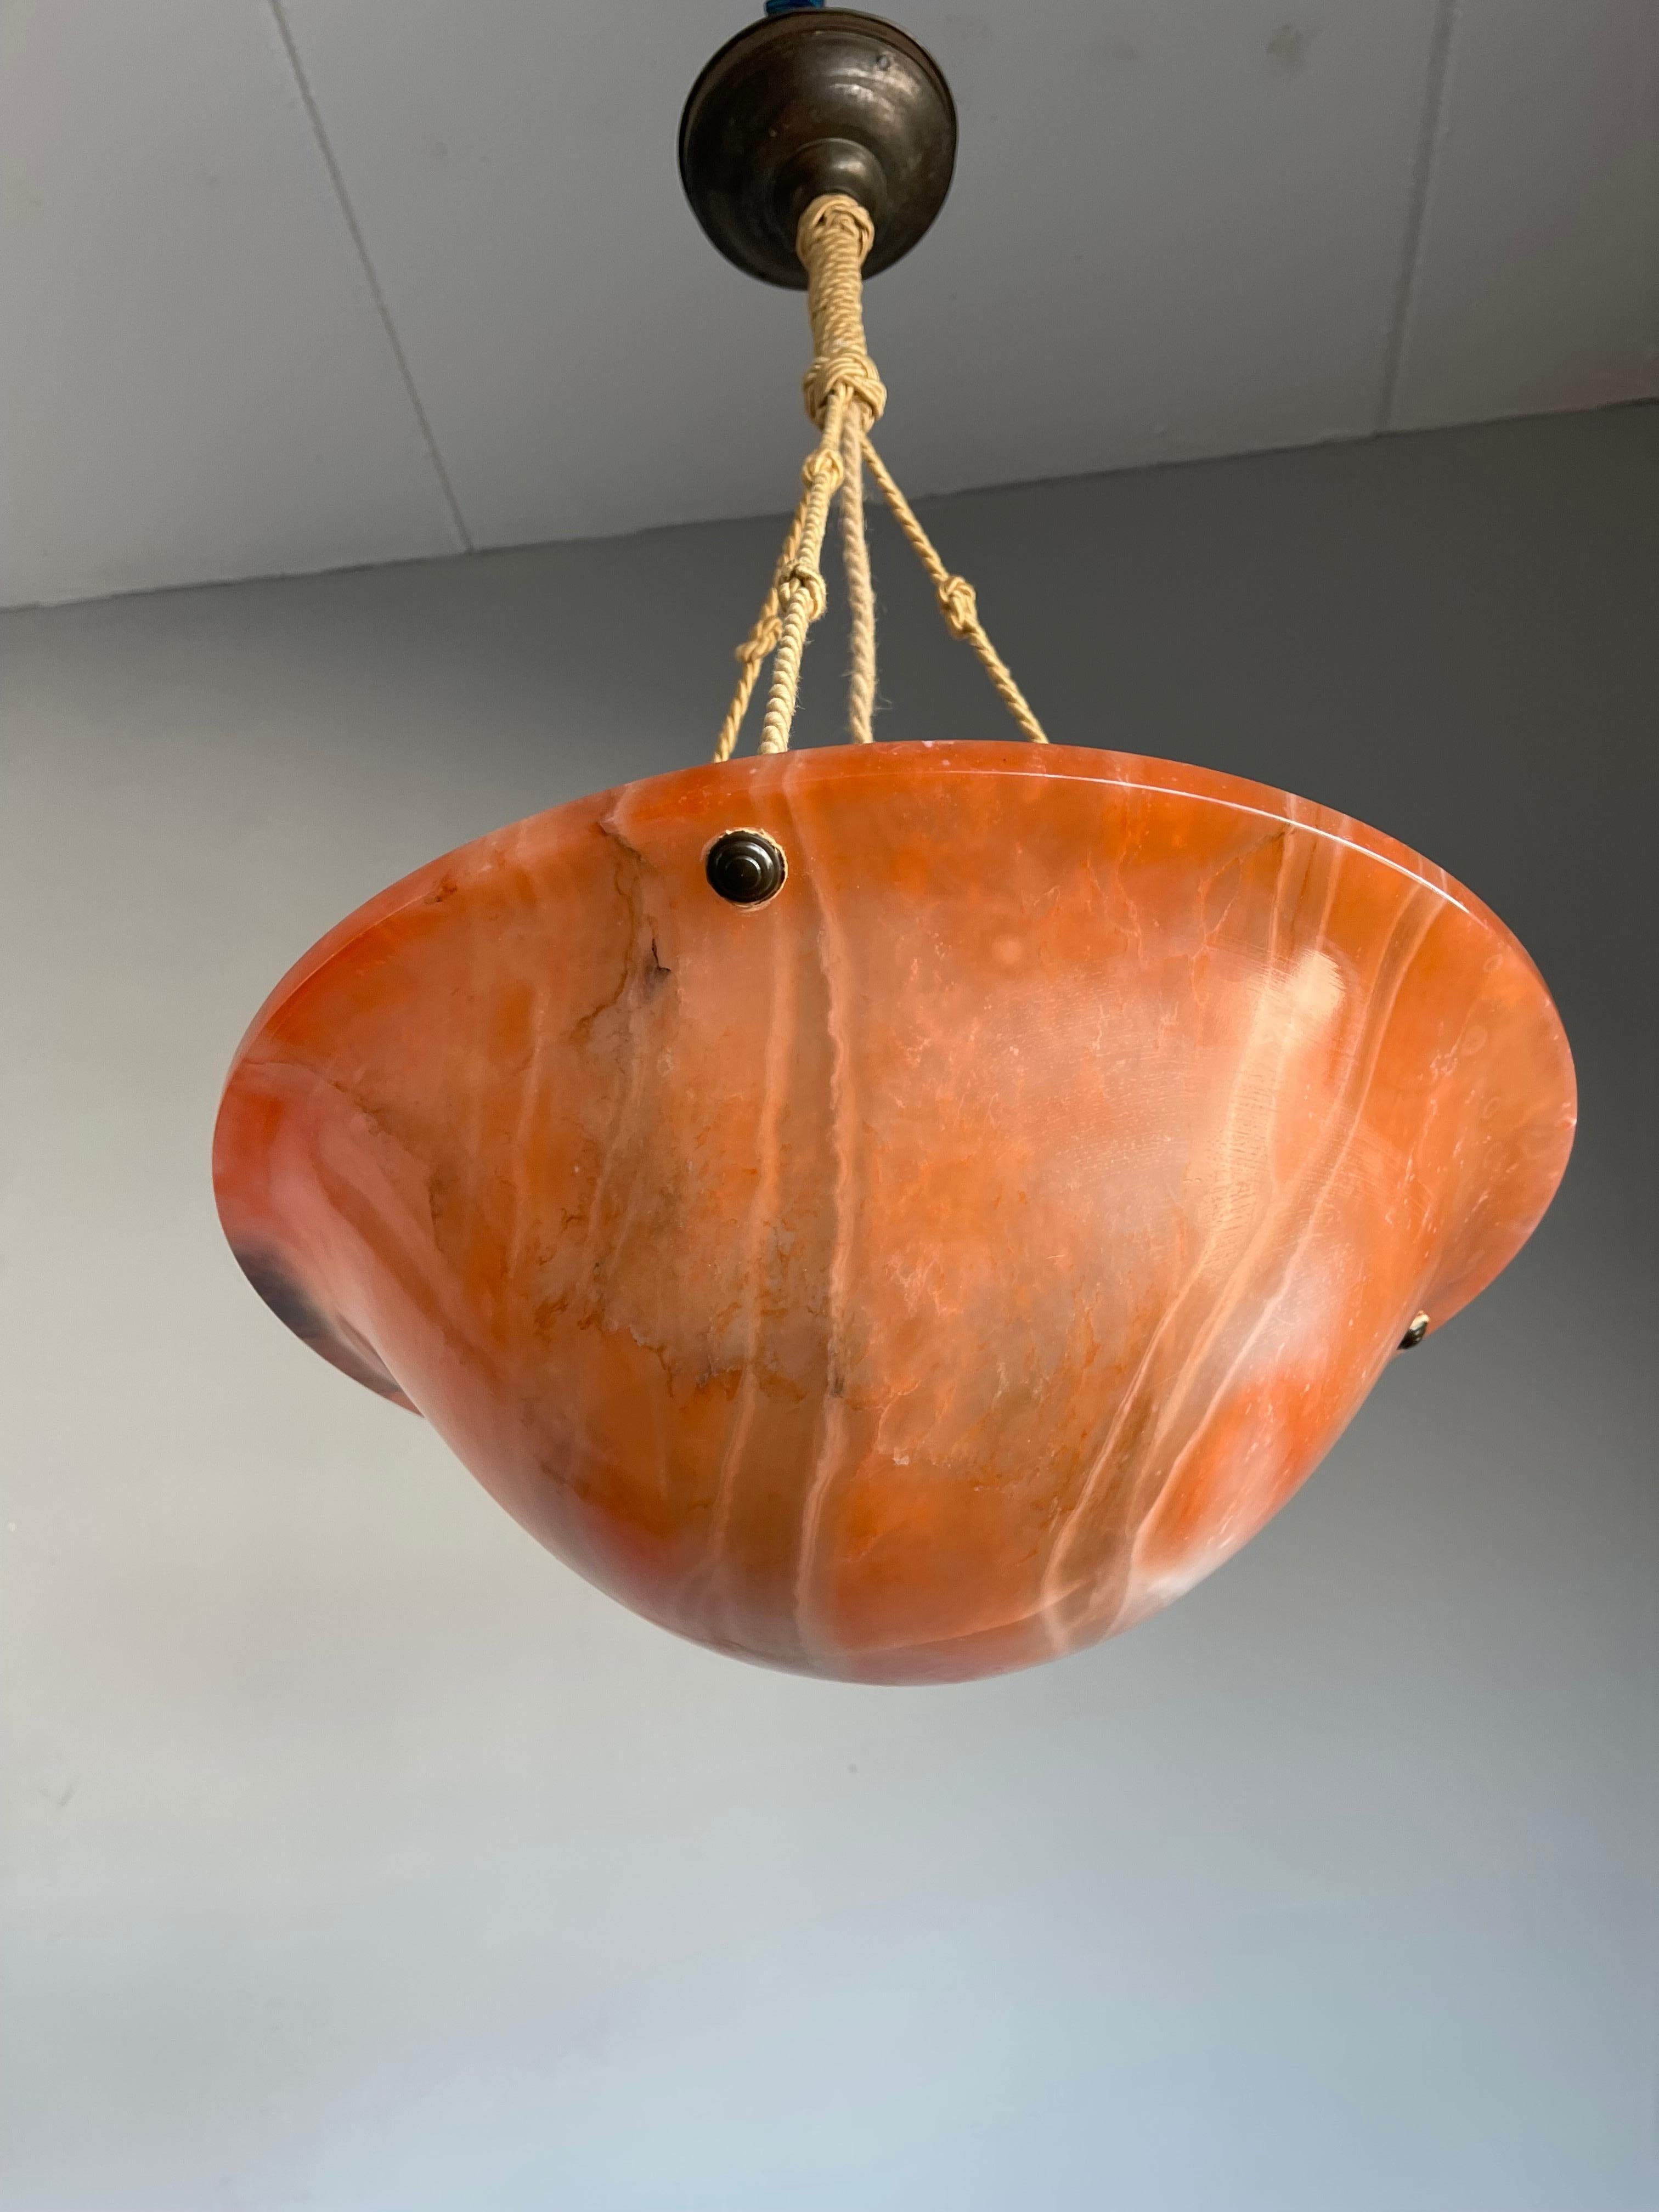 Rare alabaster pendant for an entrance, bedroom or any corner that can do with a style upgrade.

This goodsize pendant is completely original and the alabaster shade is in very good to excellent condition. This fine antique looks great both on and